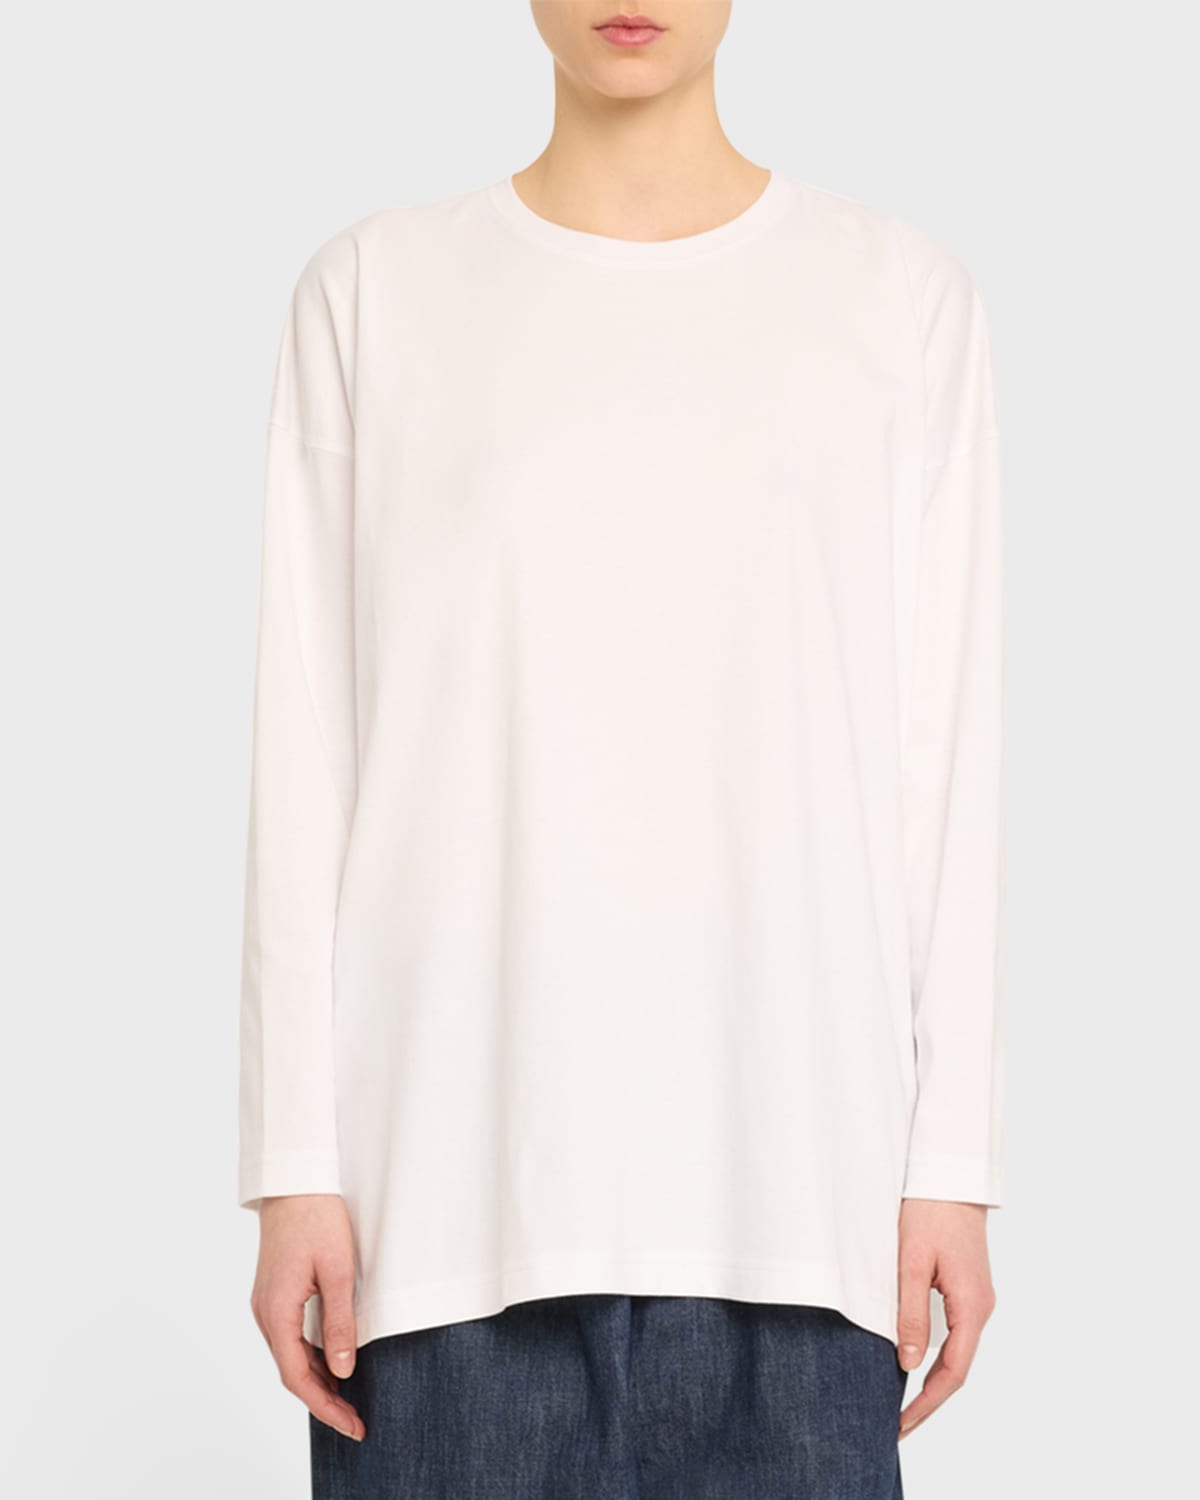 Side Panelled Round Neck Long Sleeve T-Shirt (Mid Plus Length)